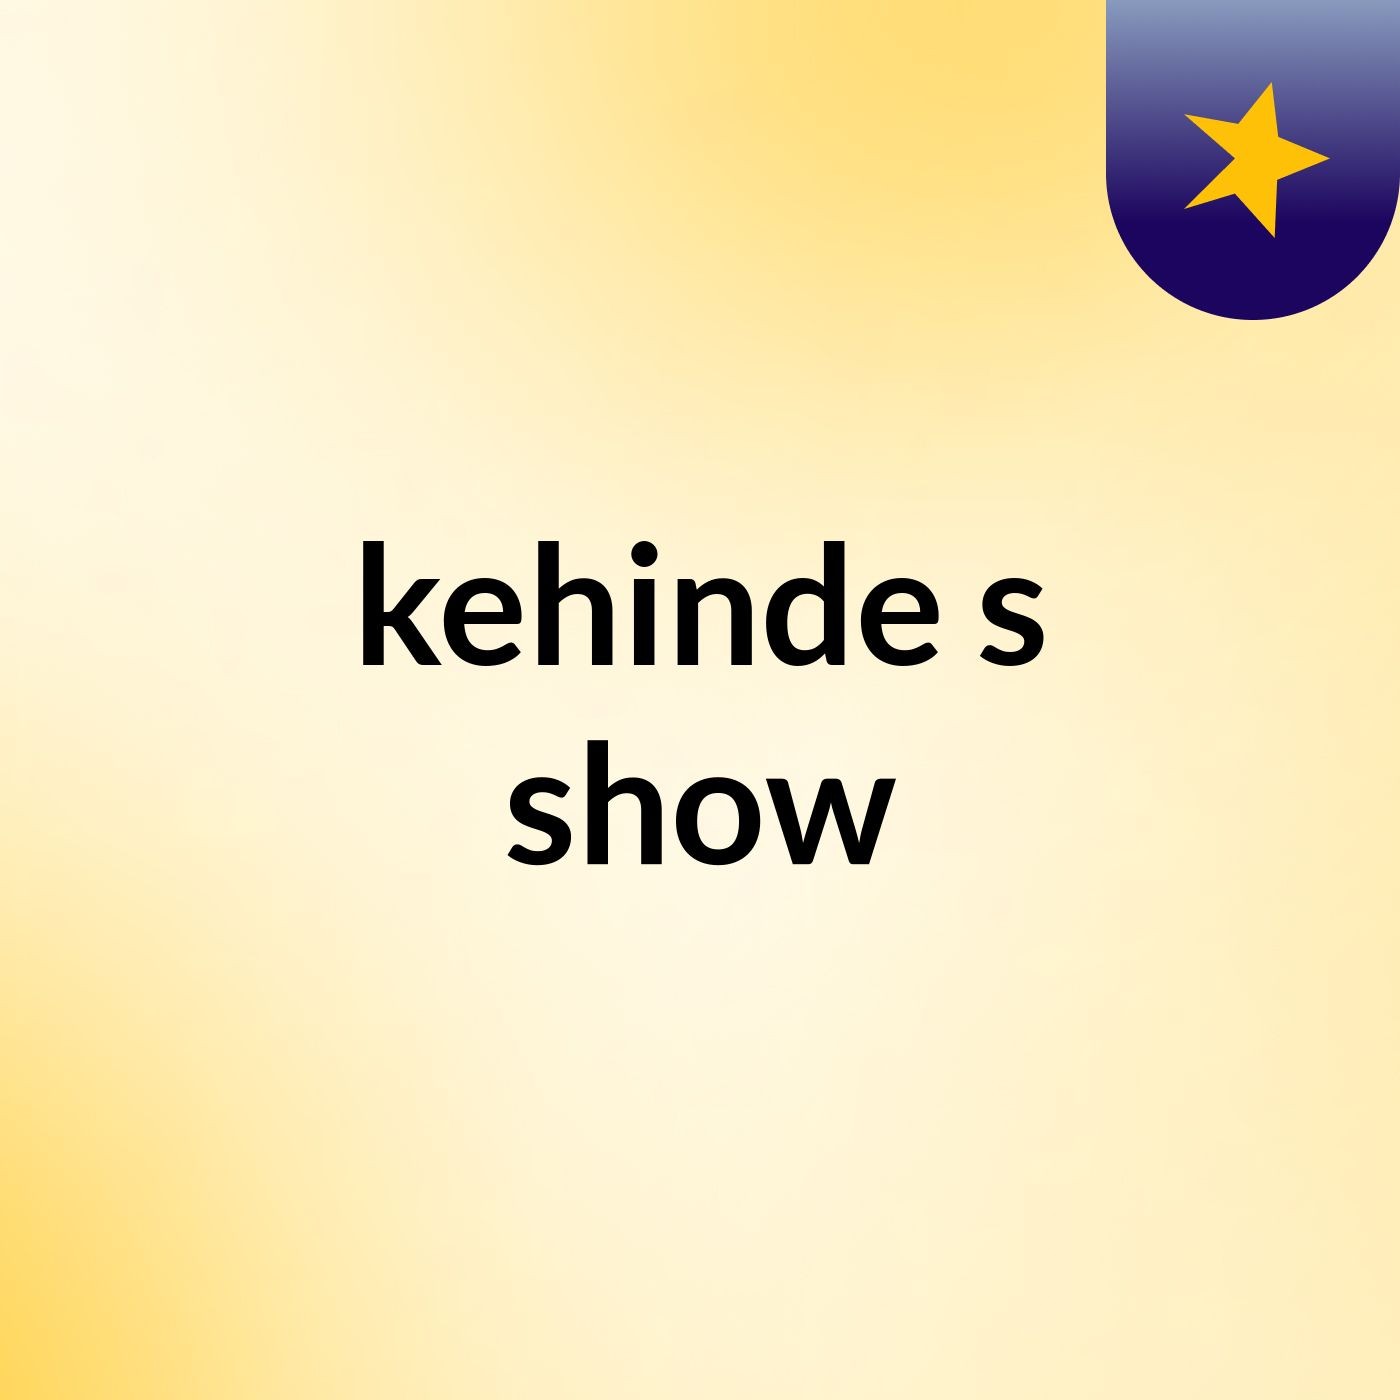 kehinde's show